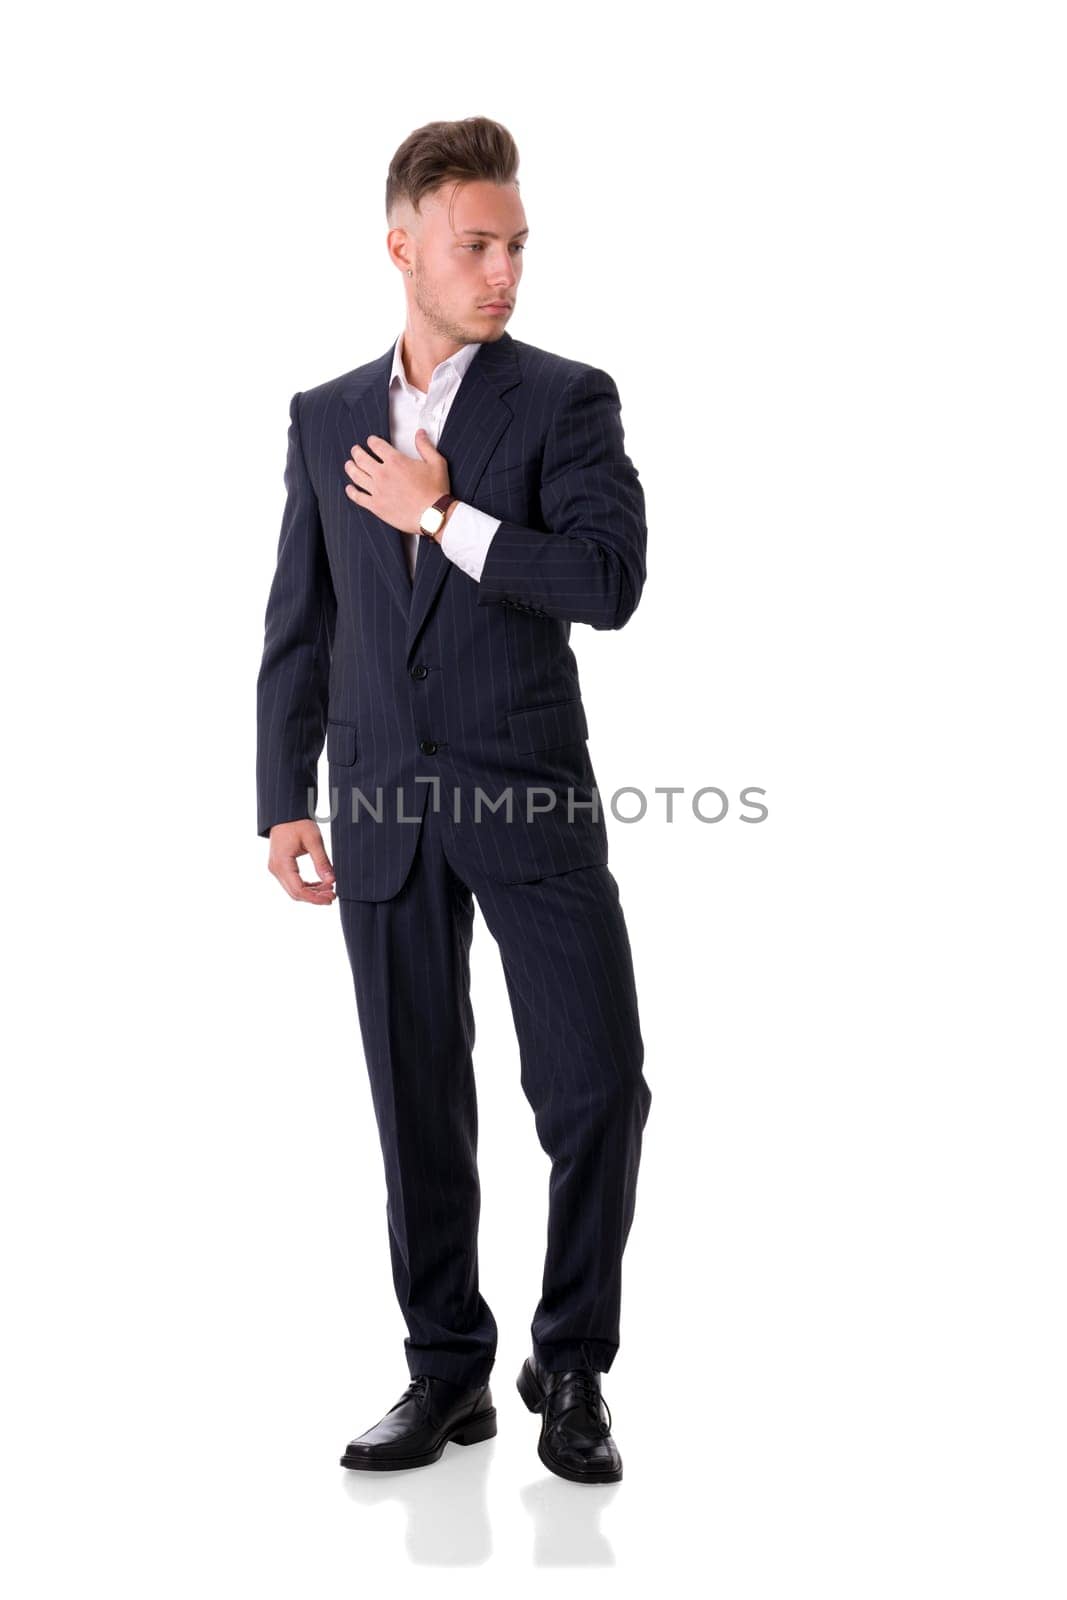 A man in a suit and tie posing for a picture, full figure shot, isolated on white in studio